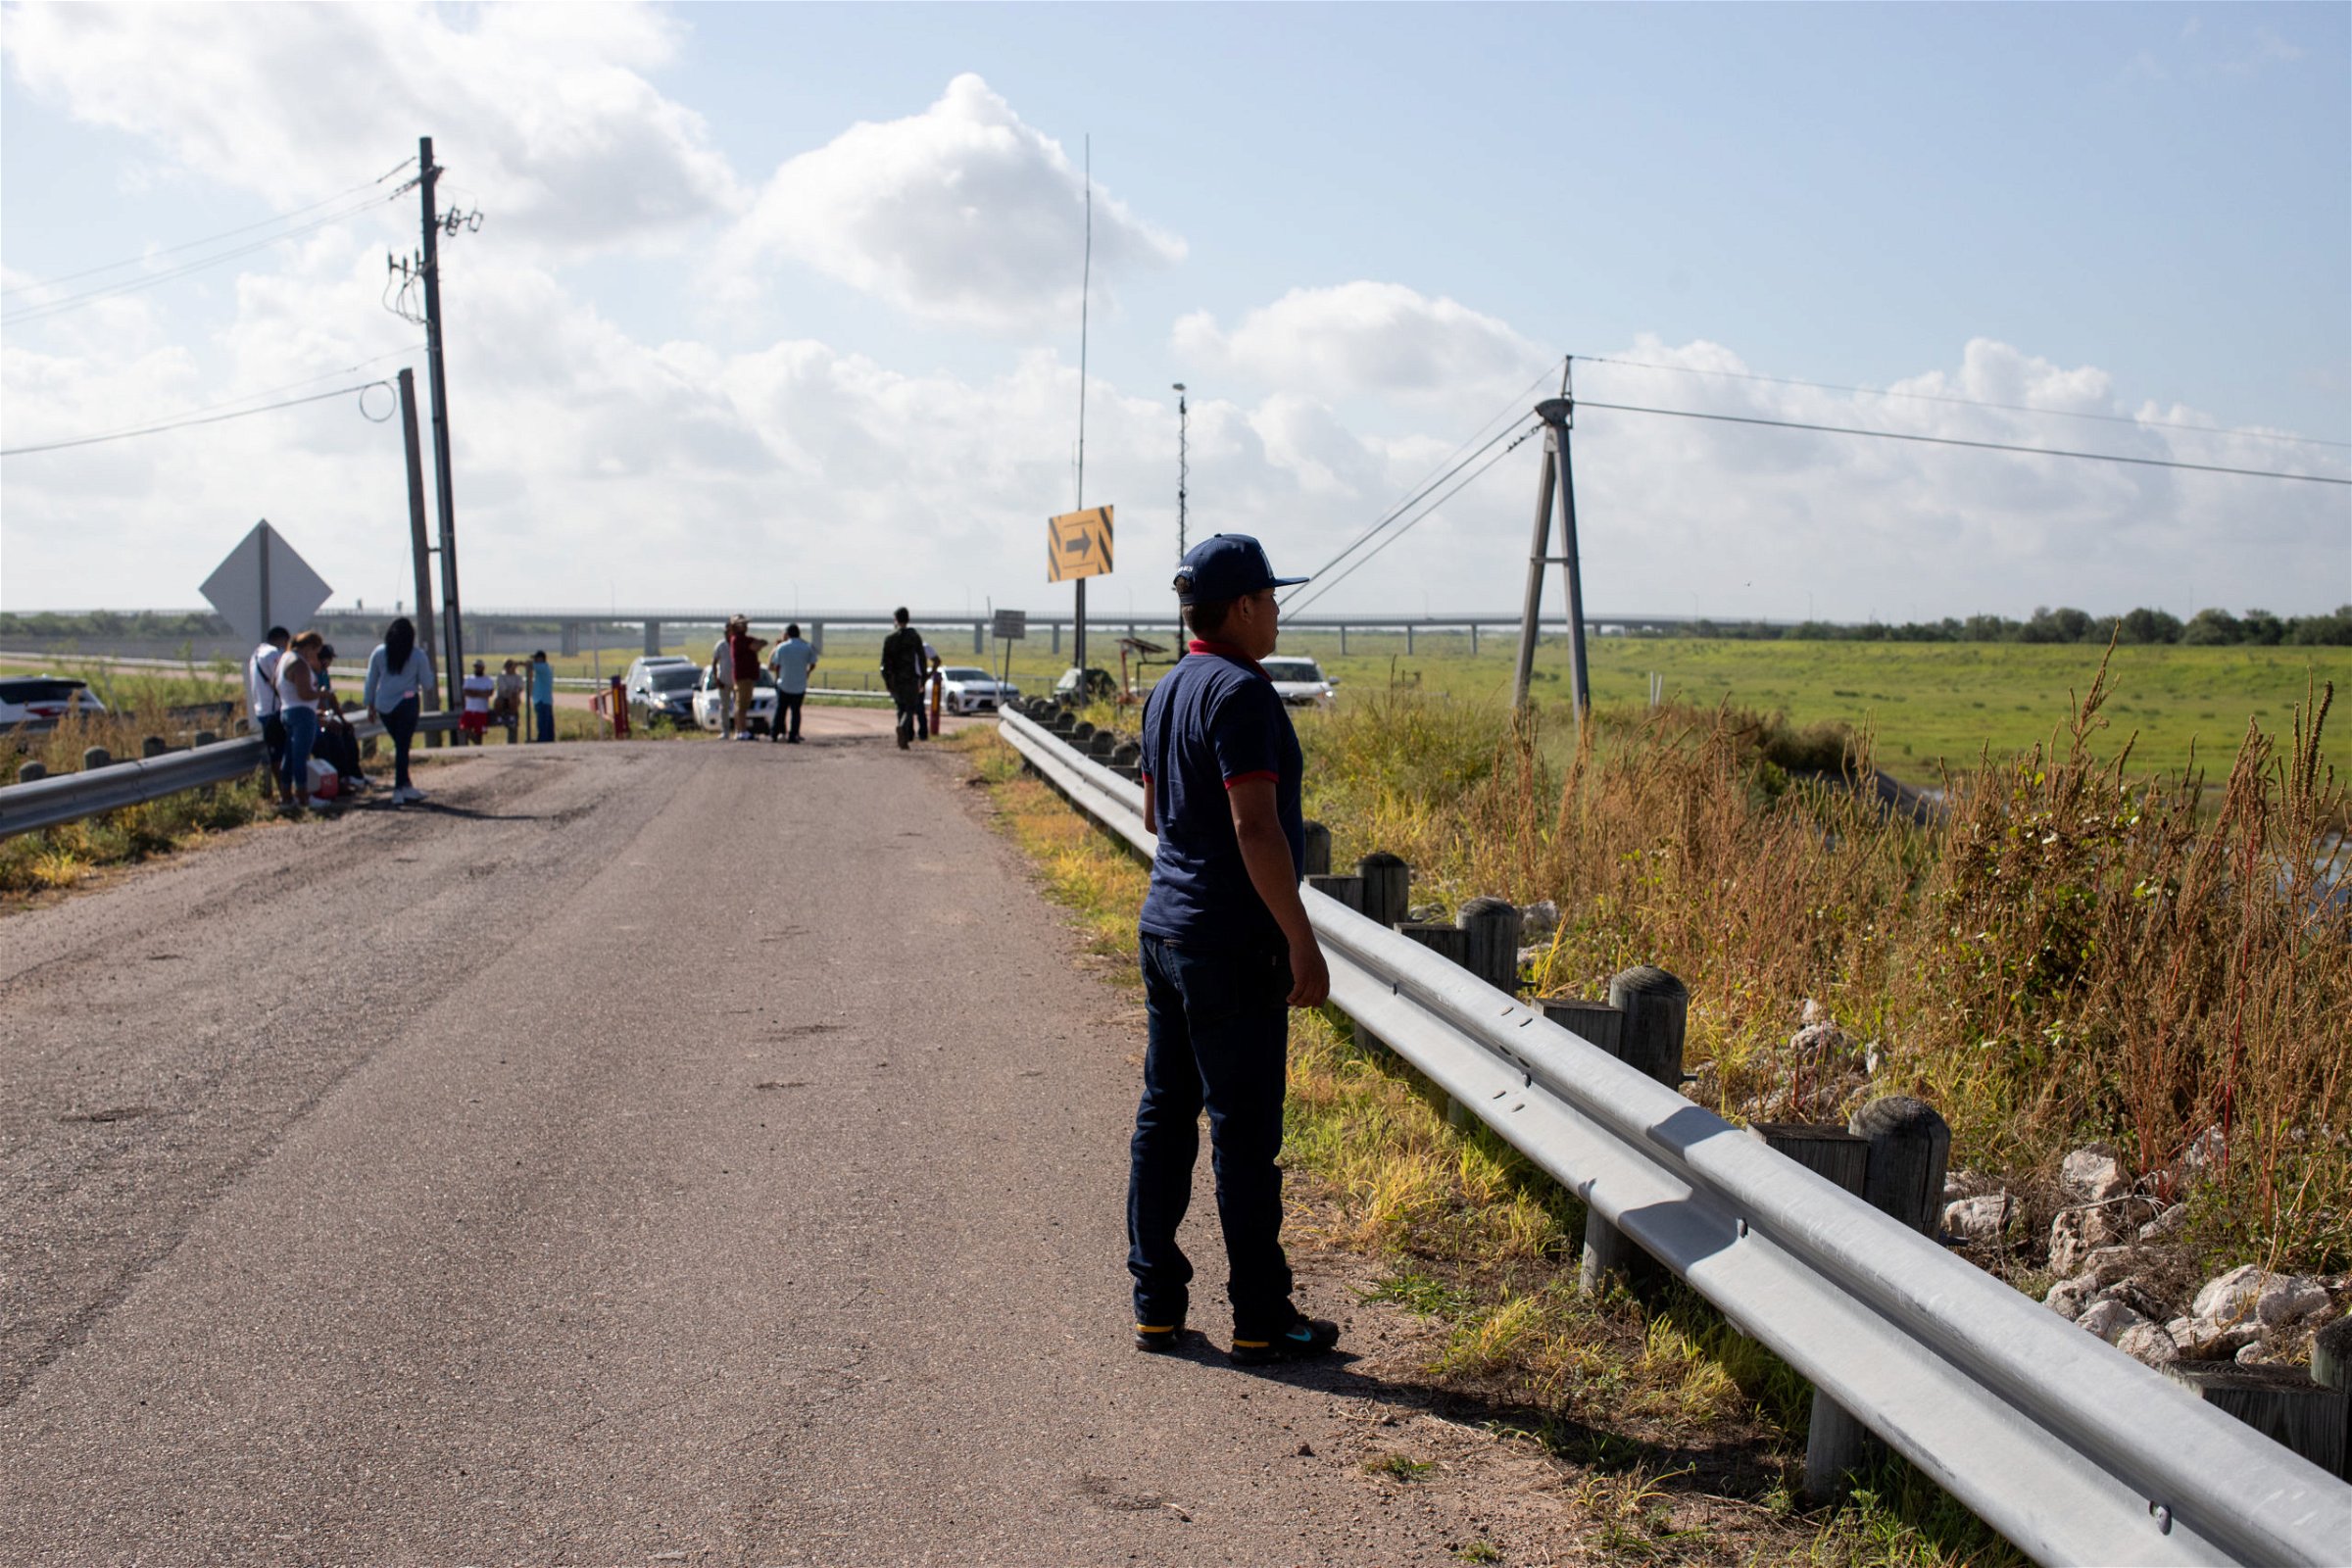 Around two dozen people waited at the endge of Anzalduas Park to pick up friends and family members who tested positive for COVID-19 after entering the U.S. illegally in Mission, Texas, on August 8, 2021. (Kaylee Greenlee - Daily Caller News Foundation)